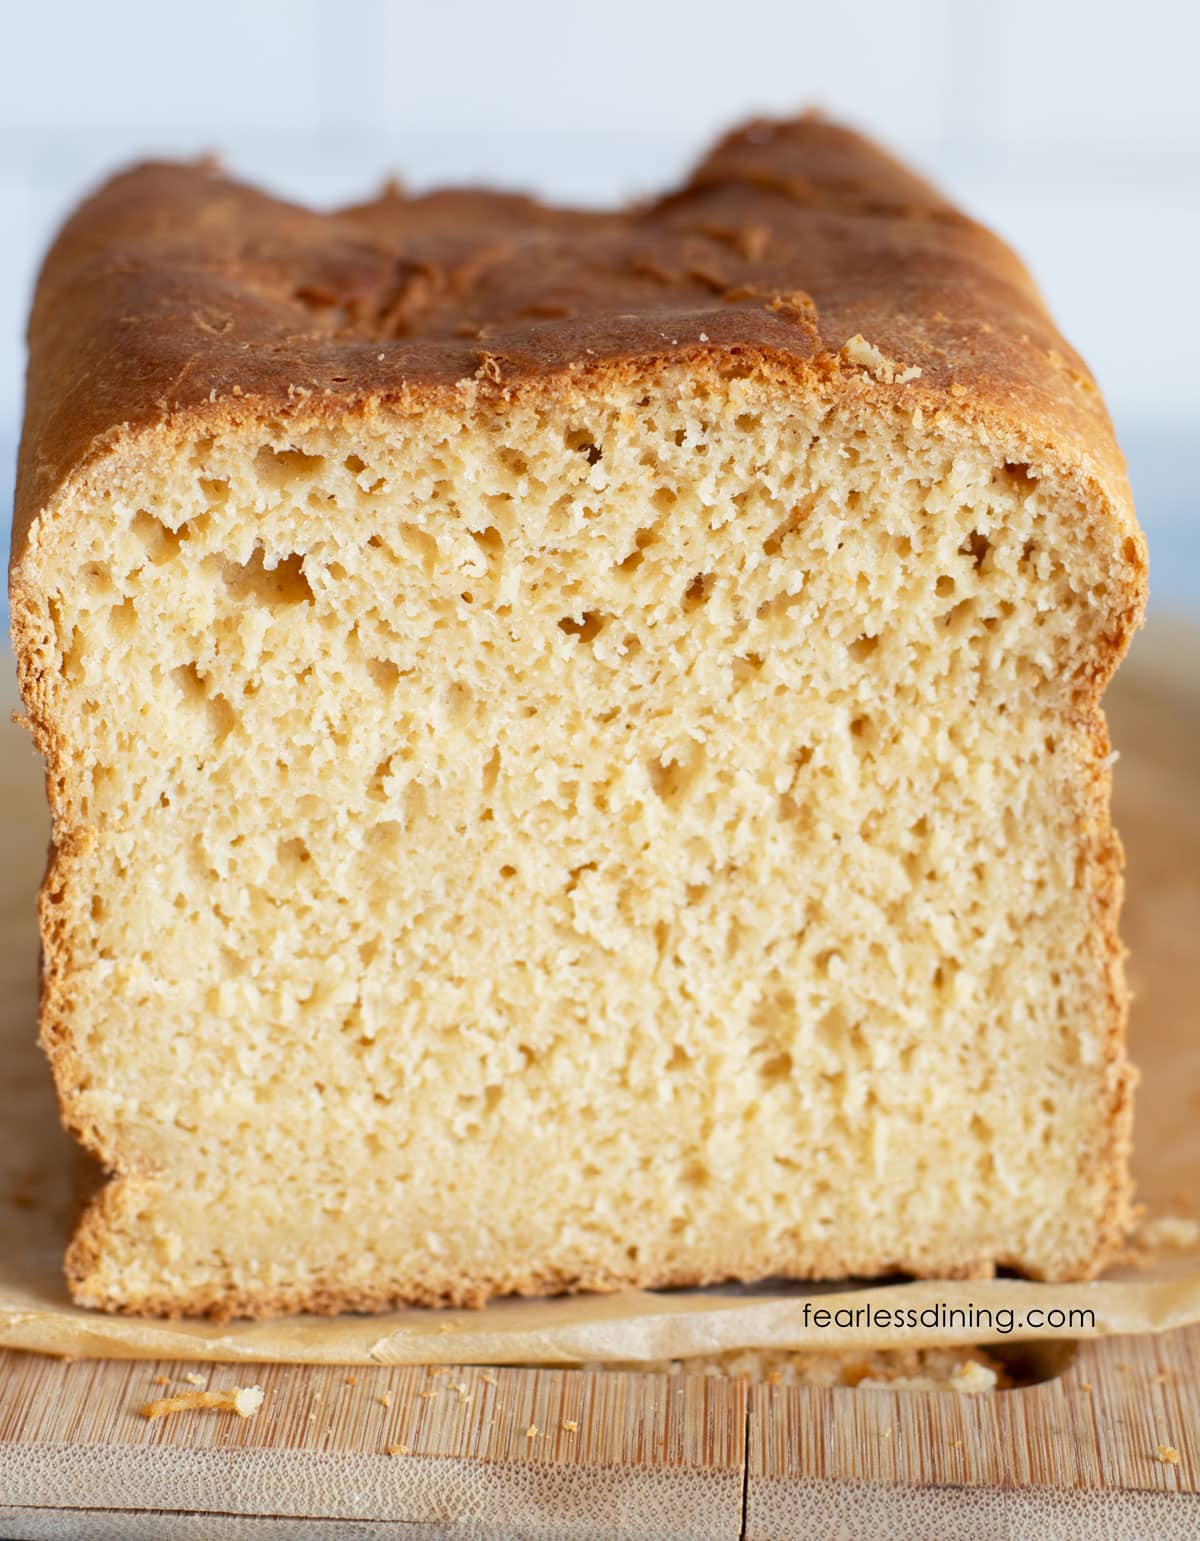 A loaf of gluten free Hawaiian bread with the ends sliced off so you can see the inside crumb.